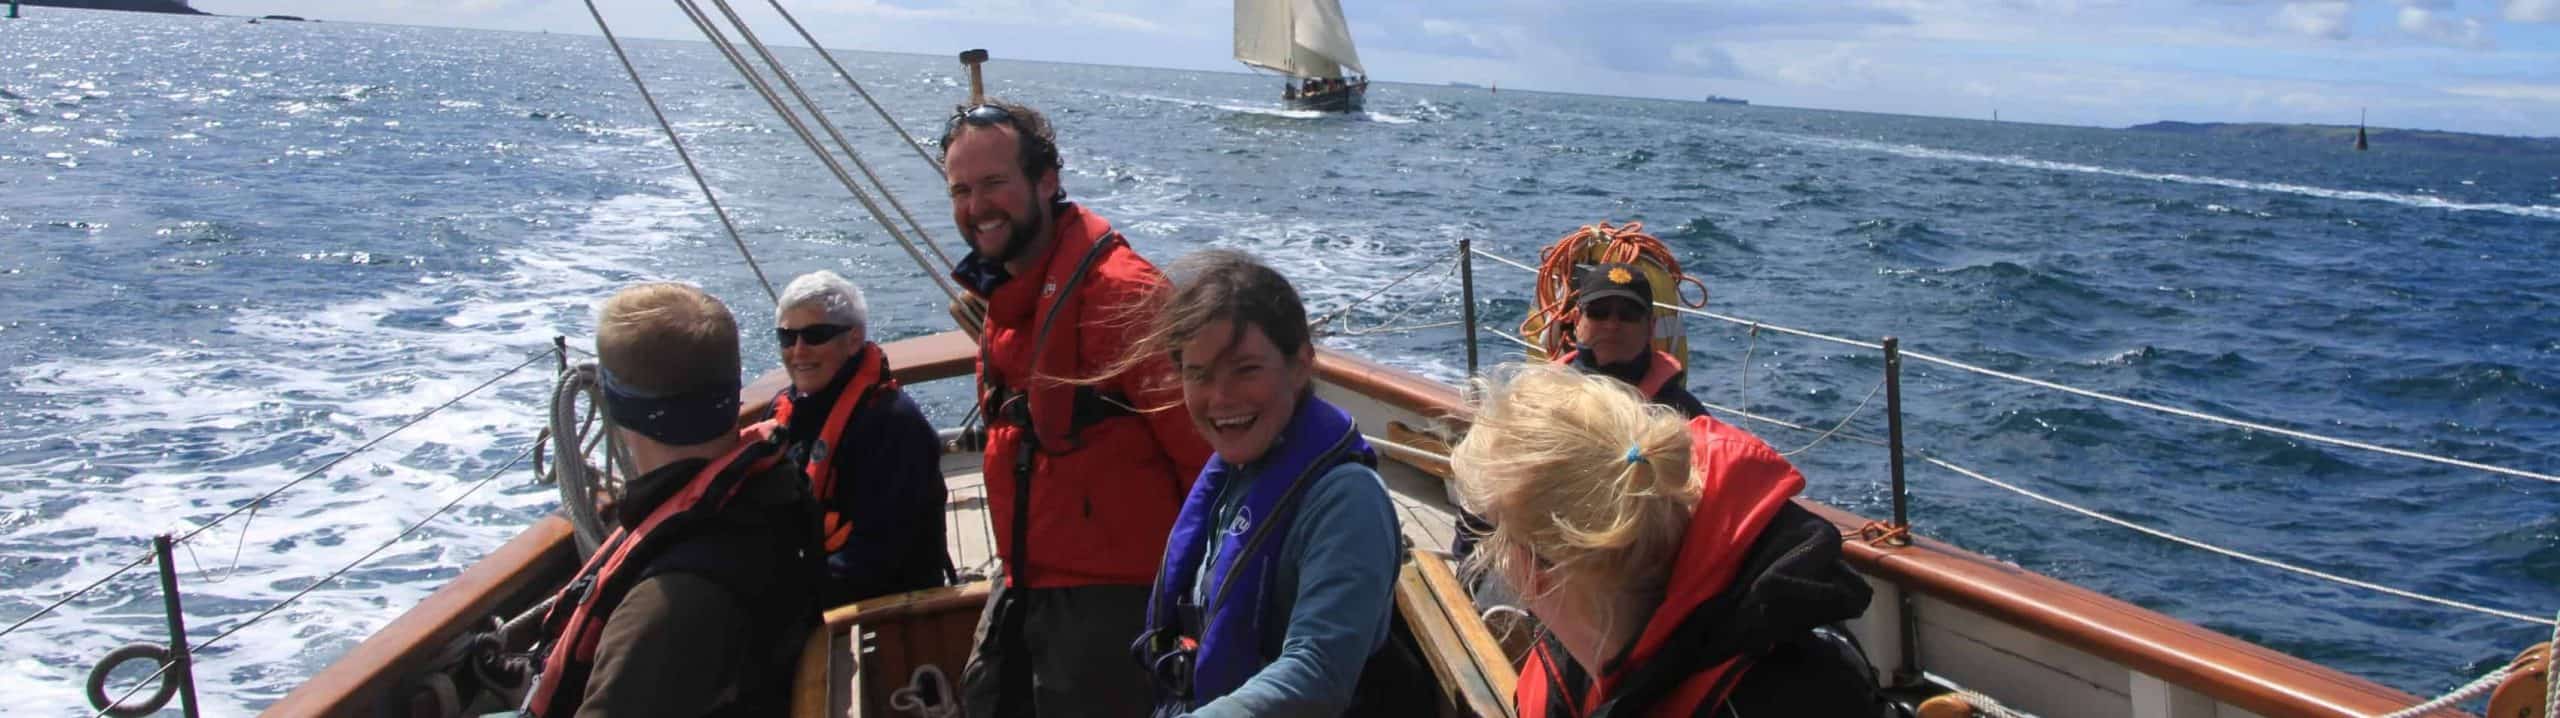 RYA Courses with Classic Sailing. Picture yourself on your inaugural voyage with Classic Sailing. Seamlessly learn to sail while embracing safety, adventure, and memorable moments.